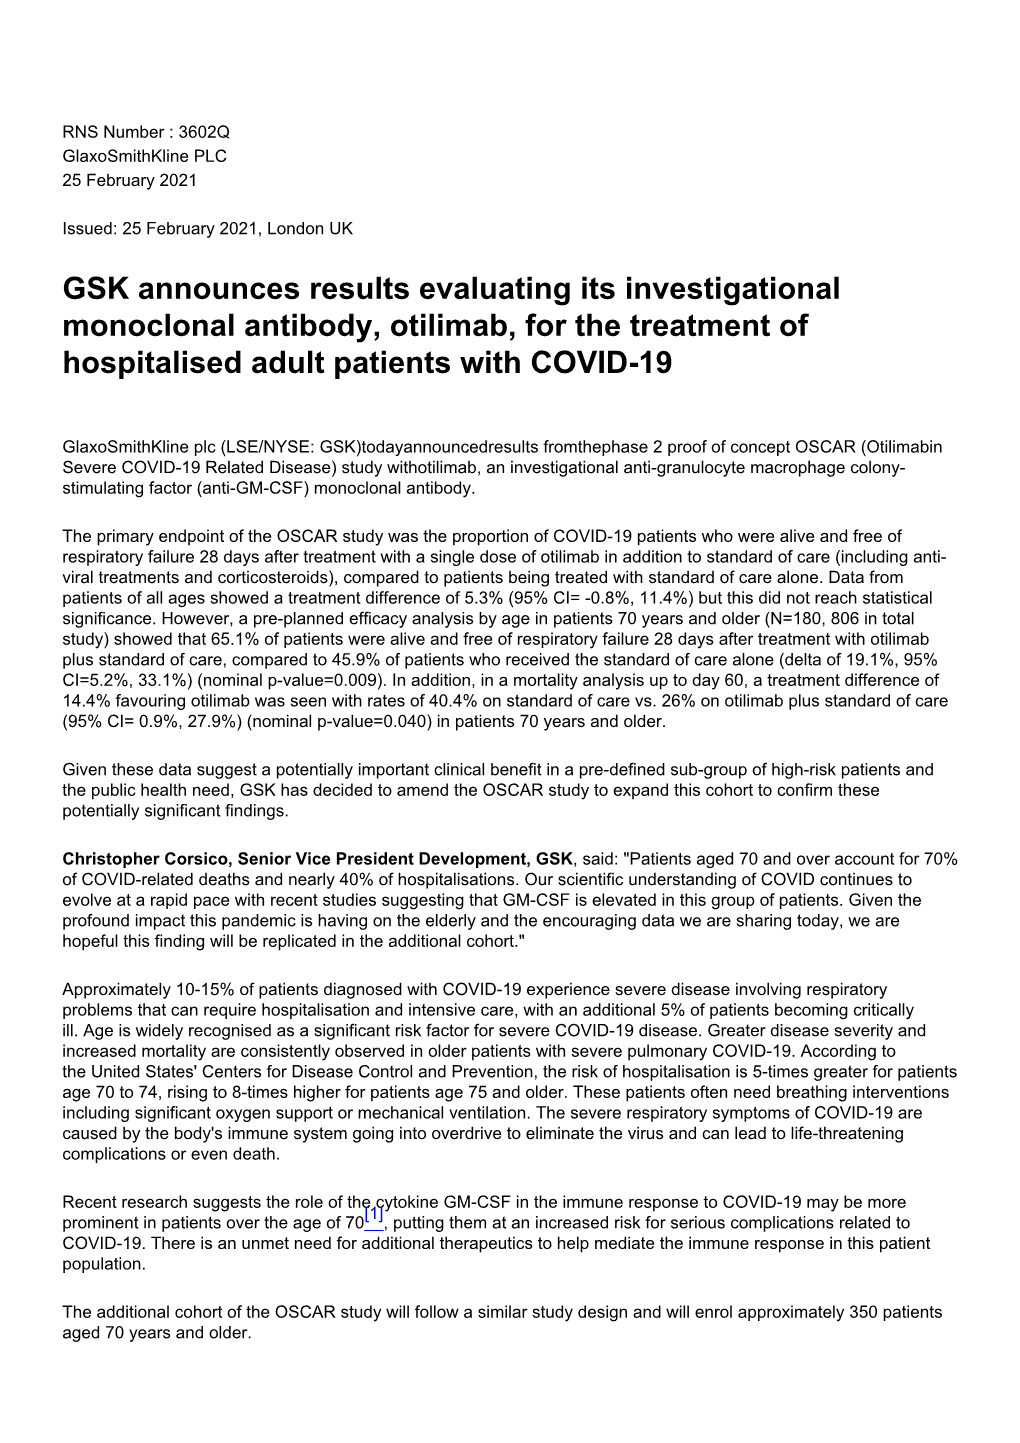 GSK Announces Results Evaluating Its Investigational Monoclonal Antibody, Otilimab, for the Treatment of Hospitalised Adult Patients with COVID-19